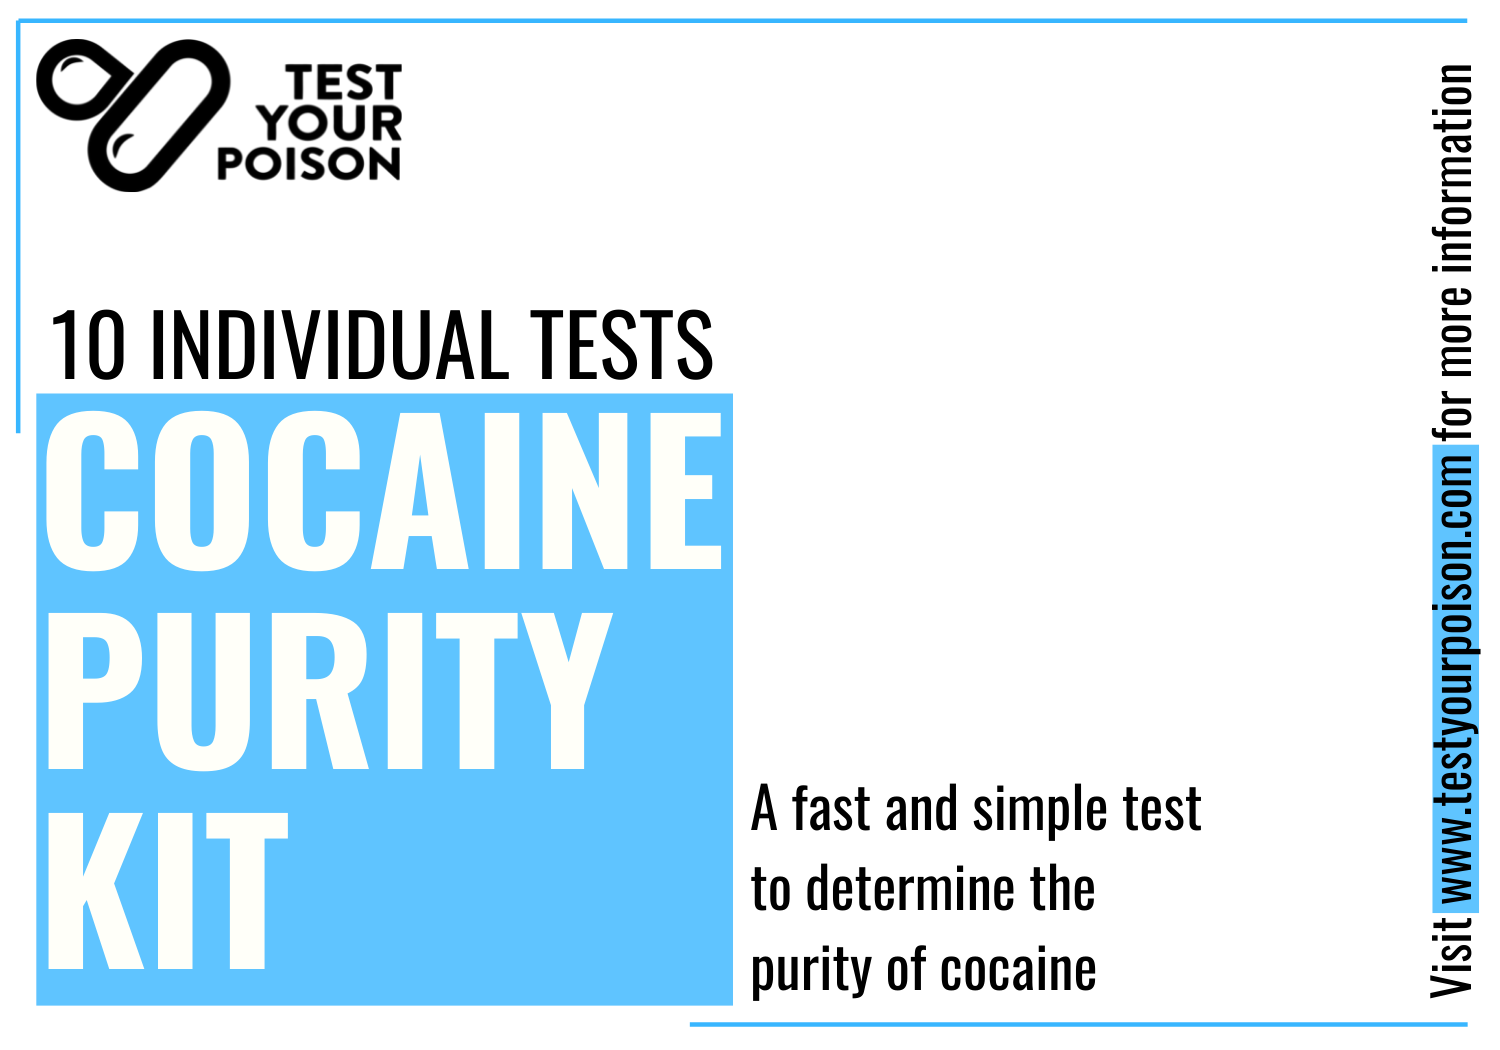 Packaging of Cocaine Purity Test Kits